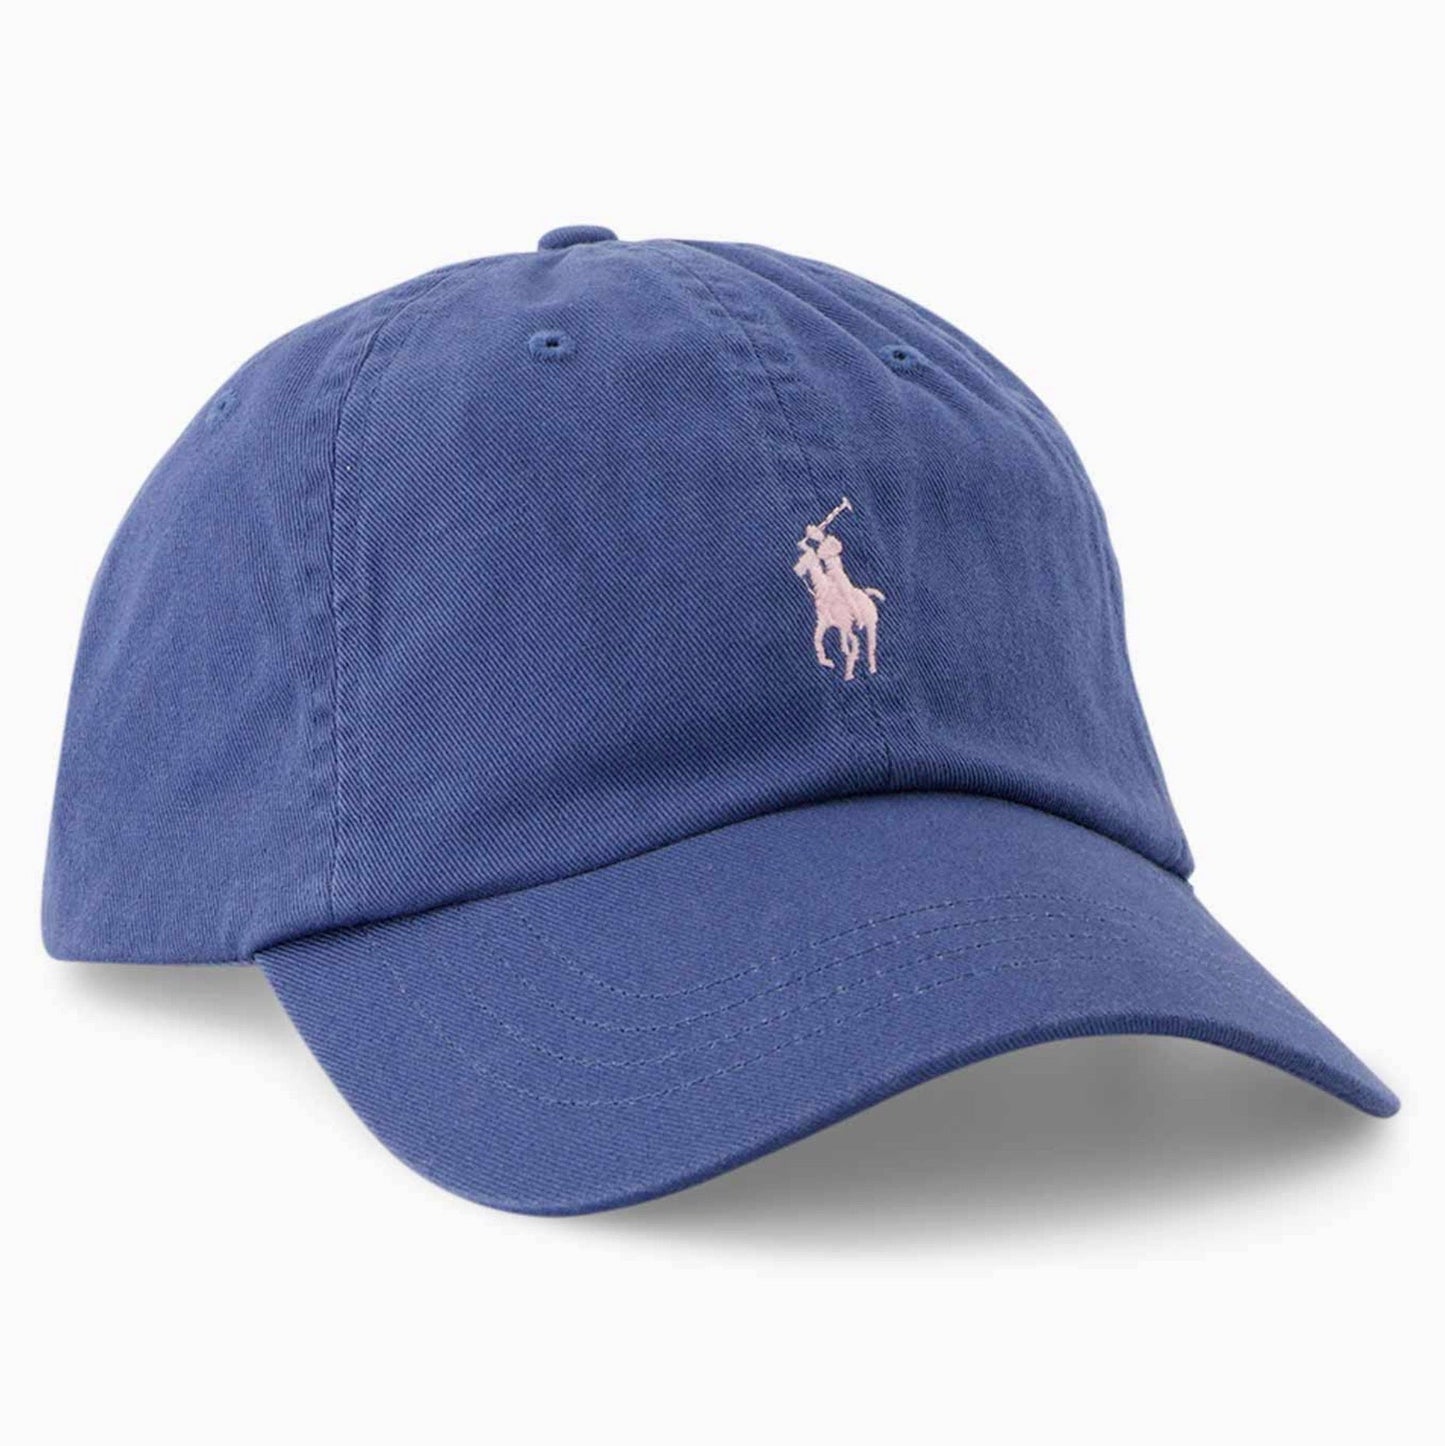 Our signature embroidered Pony—the result of 982 individual stitches—gives this ball cap an iconic Polo finish. Crafted from Better Cotton™ twill, it features our logo and a buckled strap at the back.